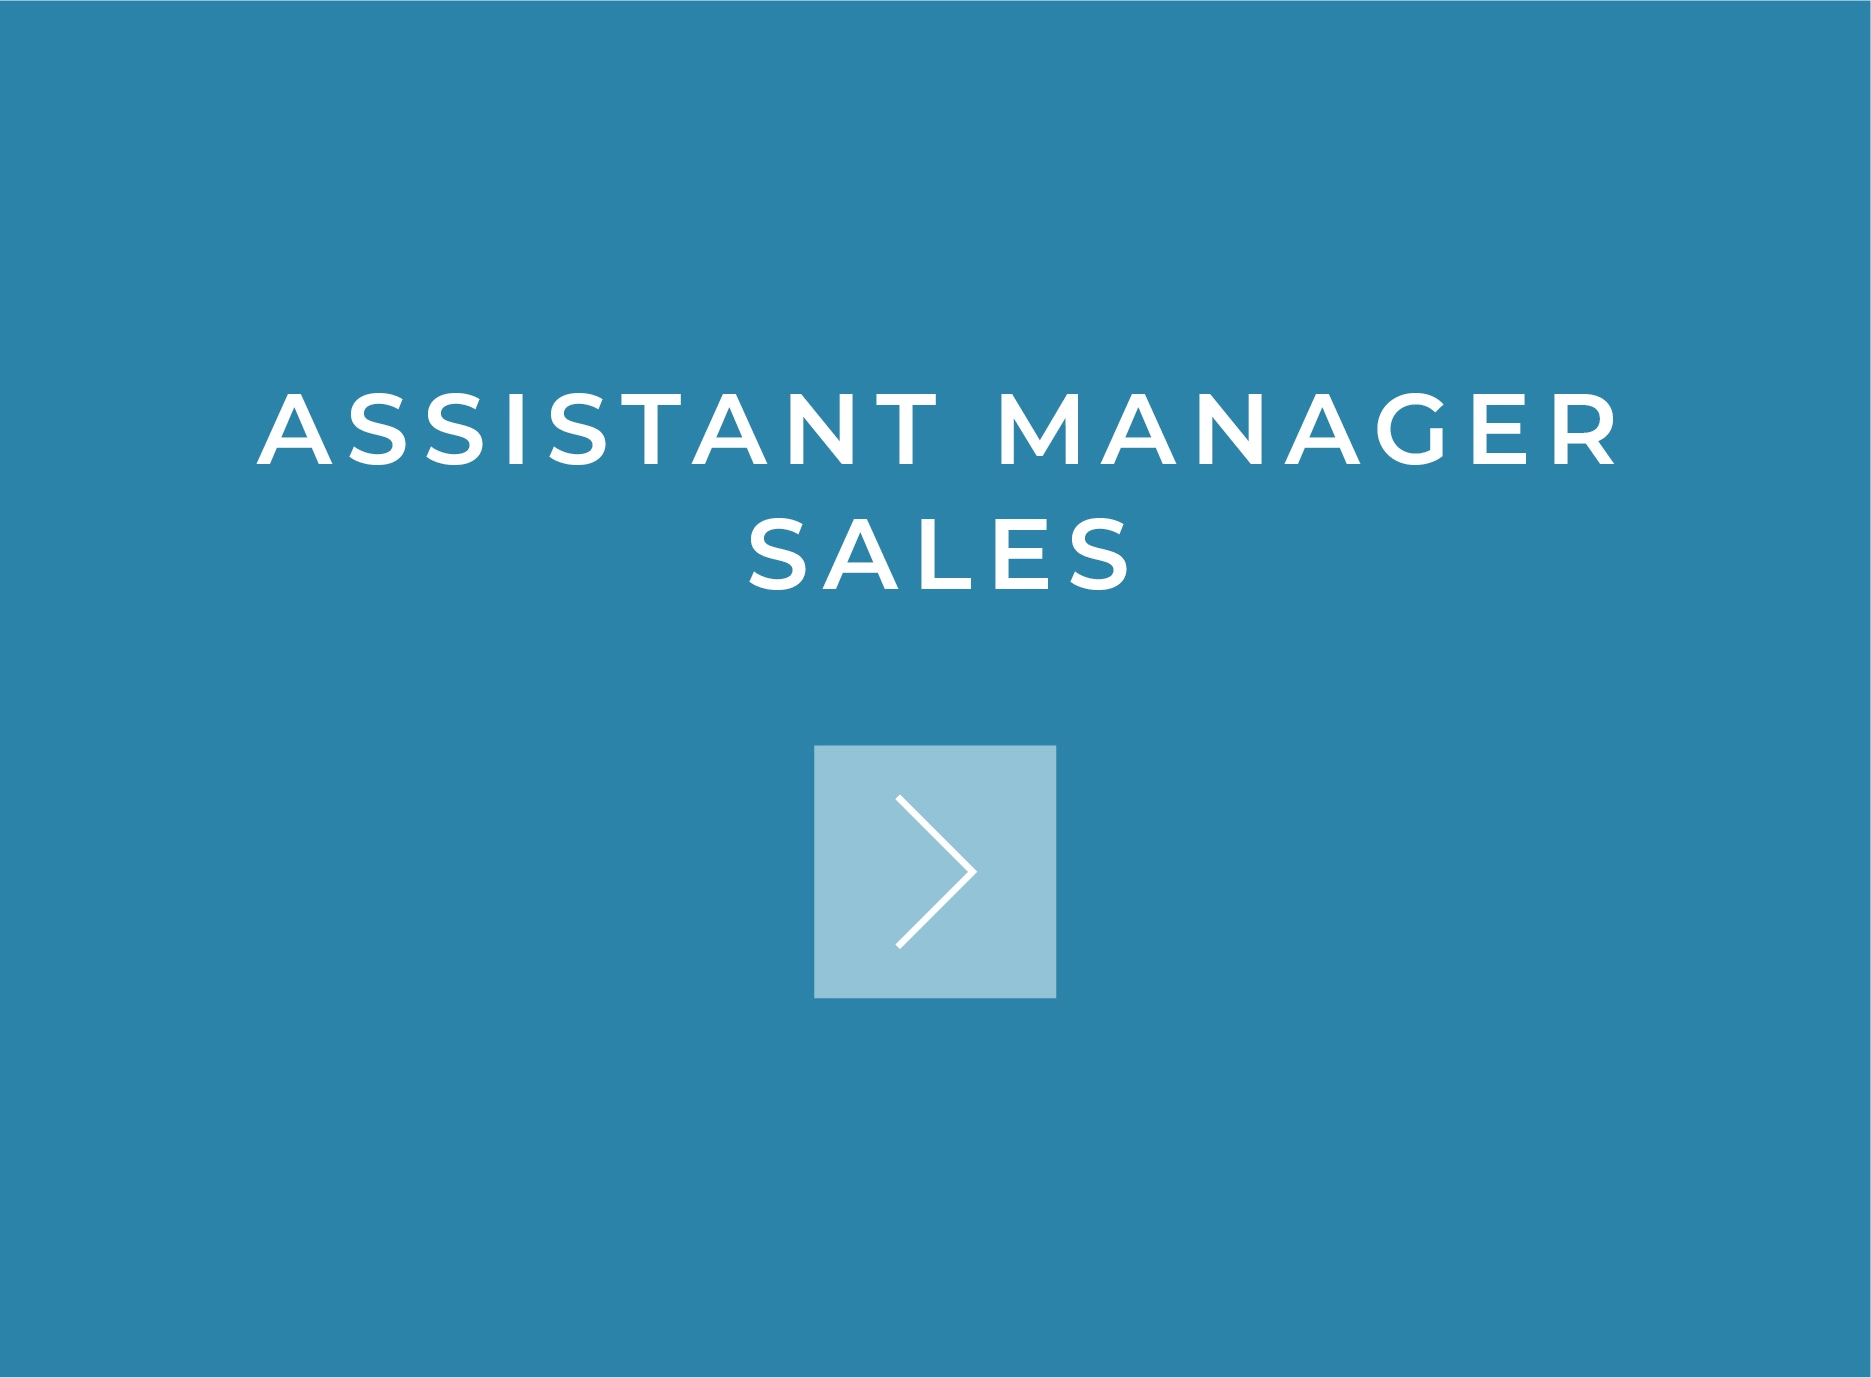 ICLOUDHOMES ASSISTANT MANAGER SALES VACCANCY